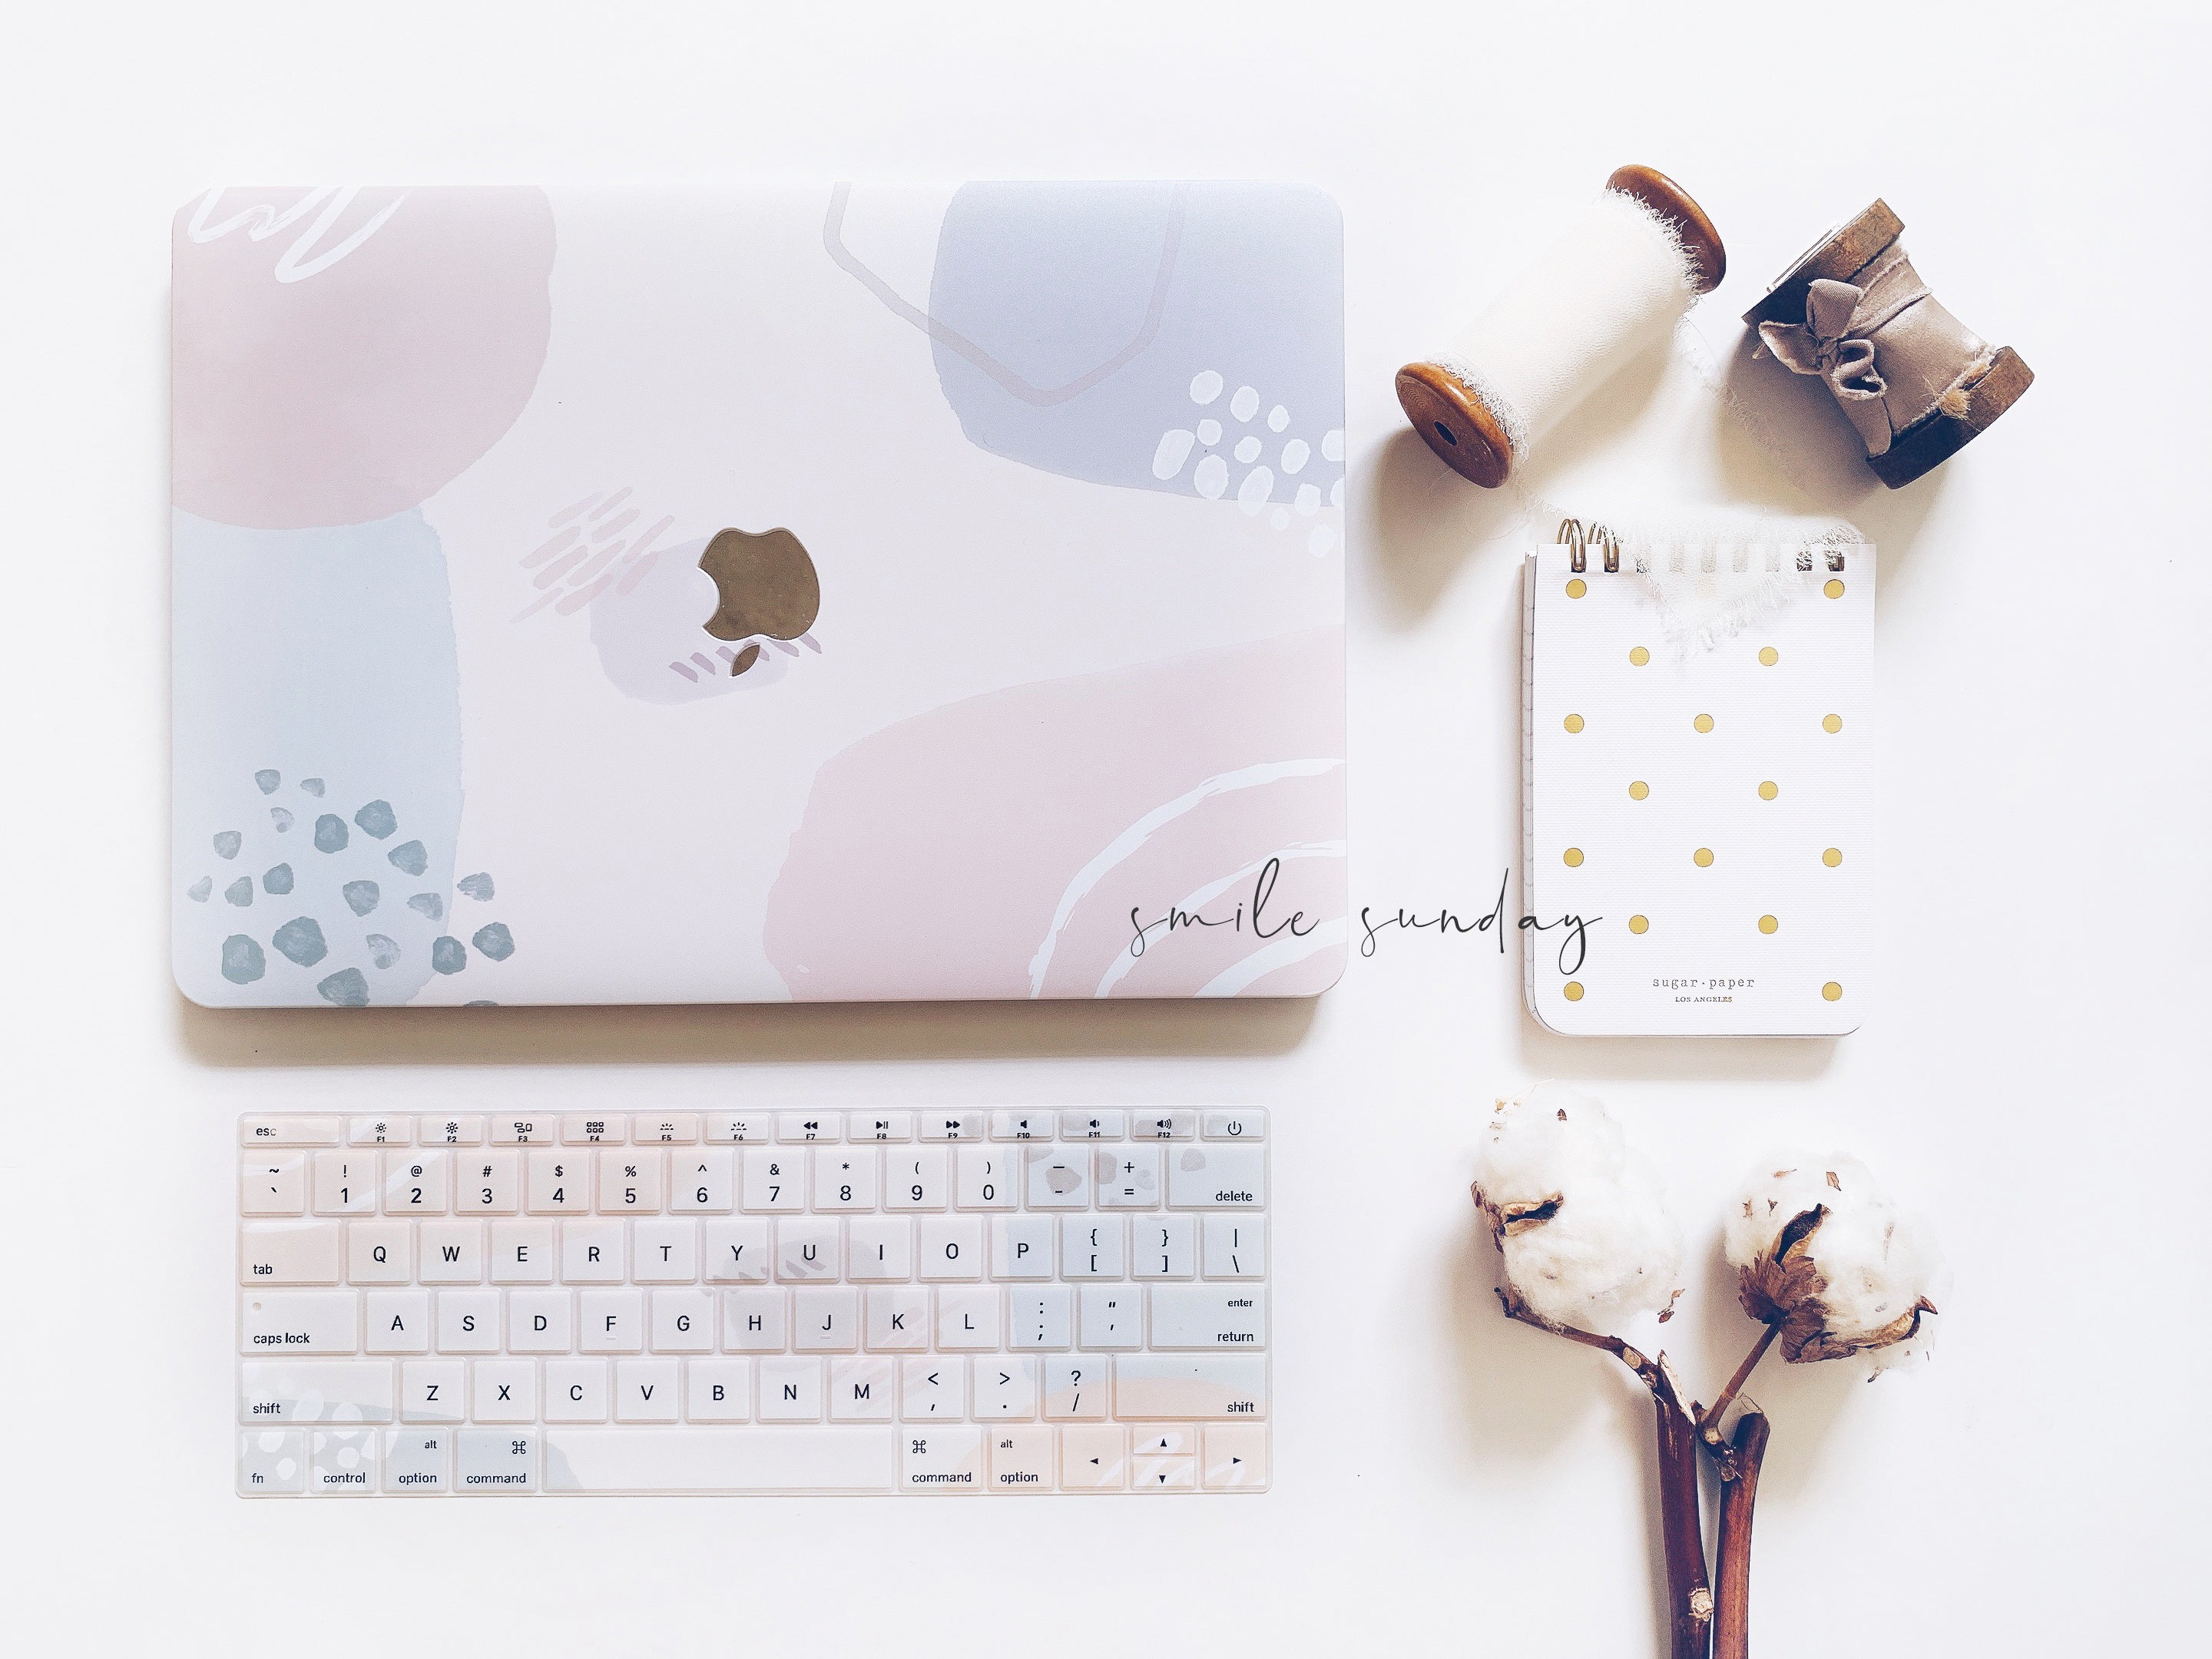 [New Colour] Blush Neutral Macbook Air/Pro/Retina Case + Matching Keyboard Cover